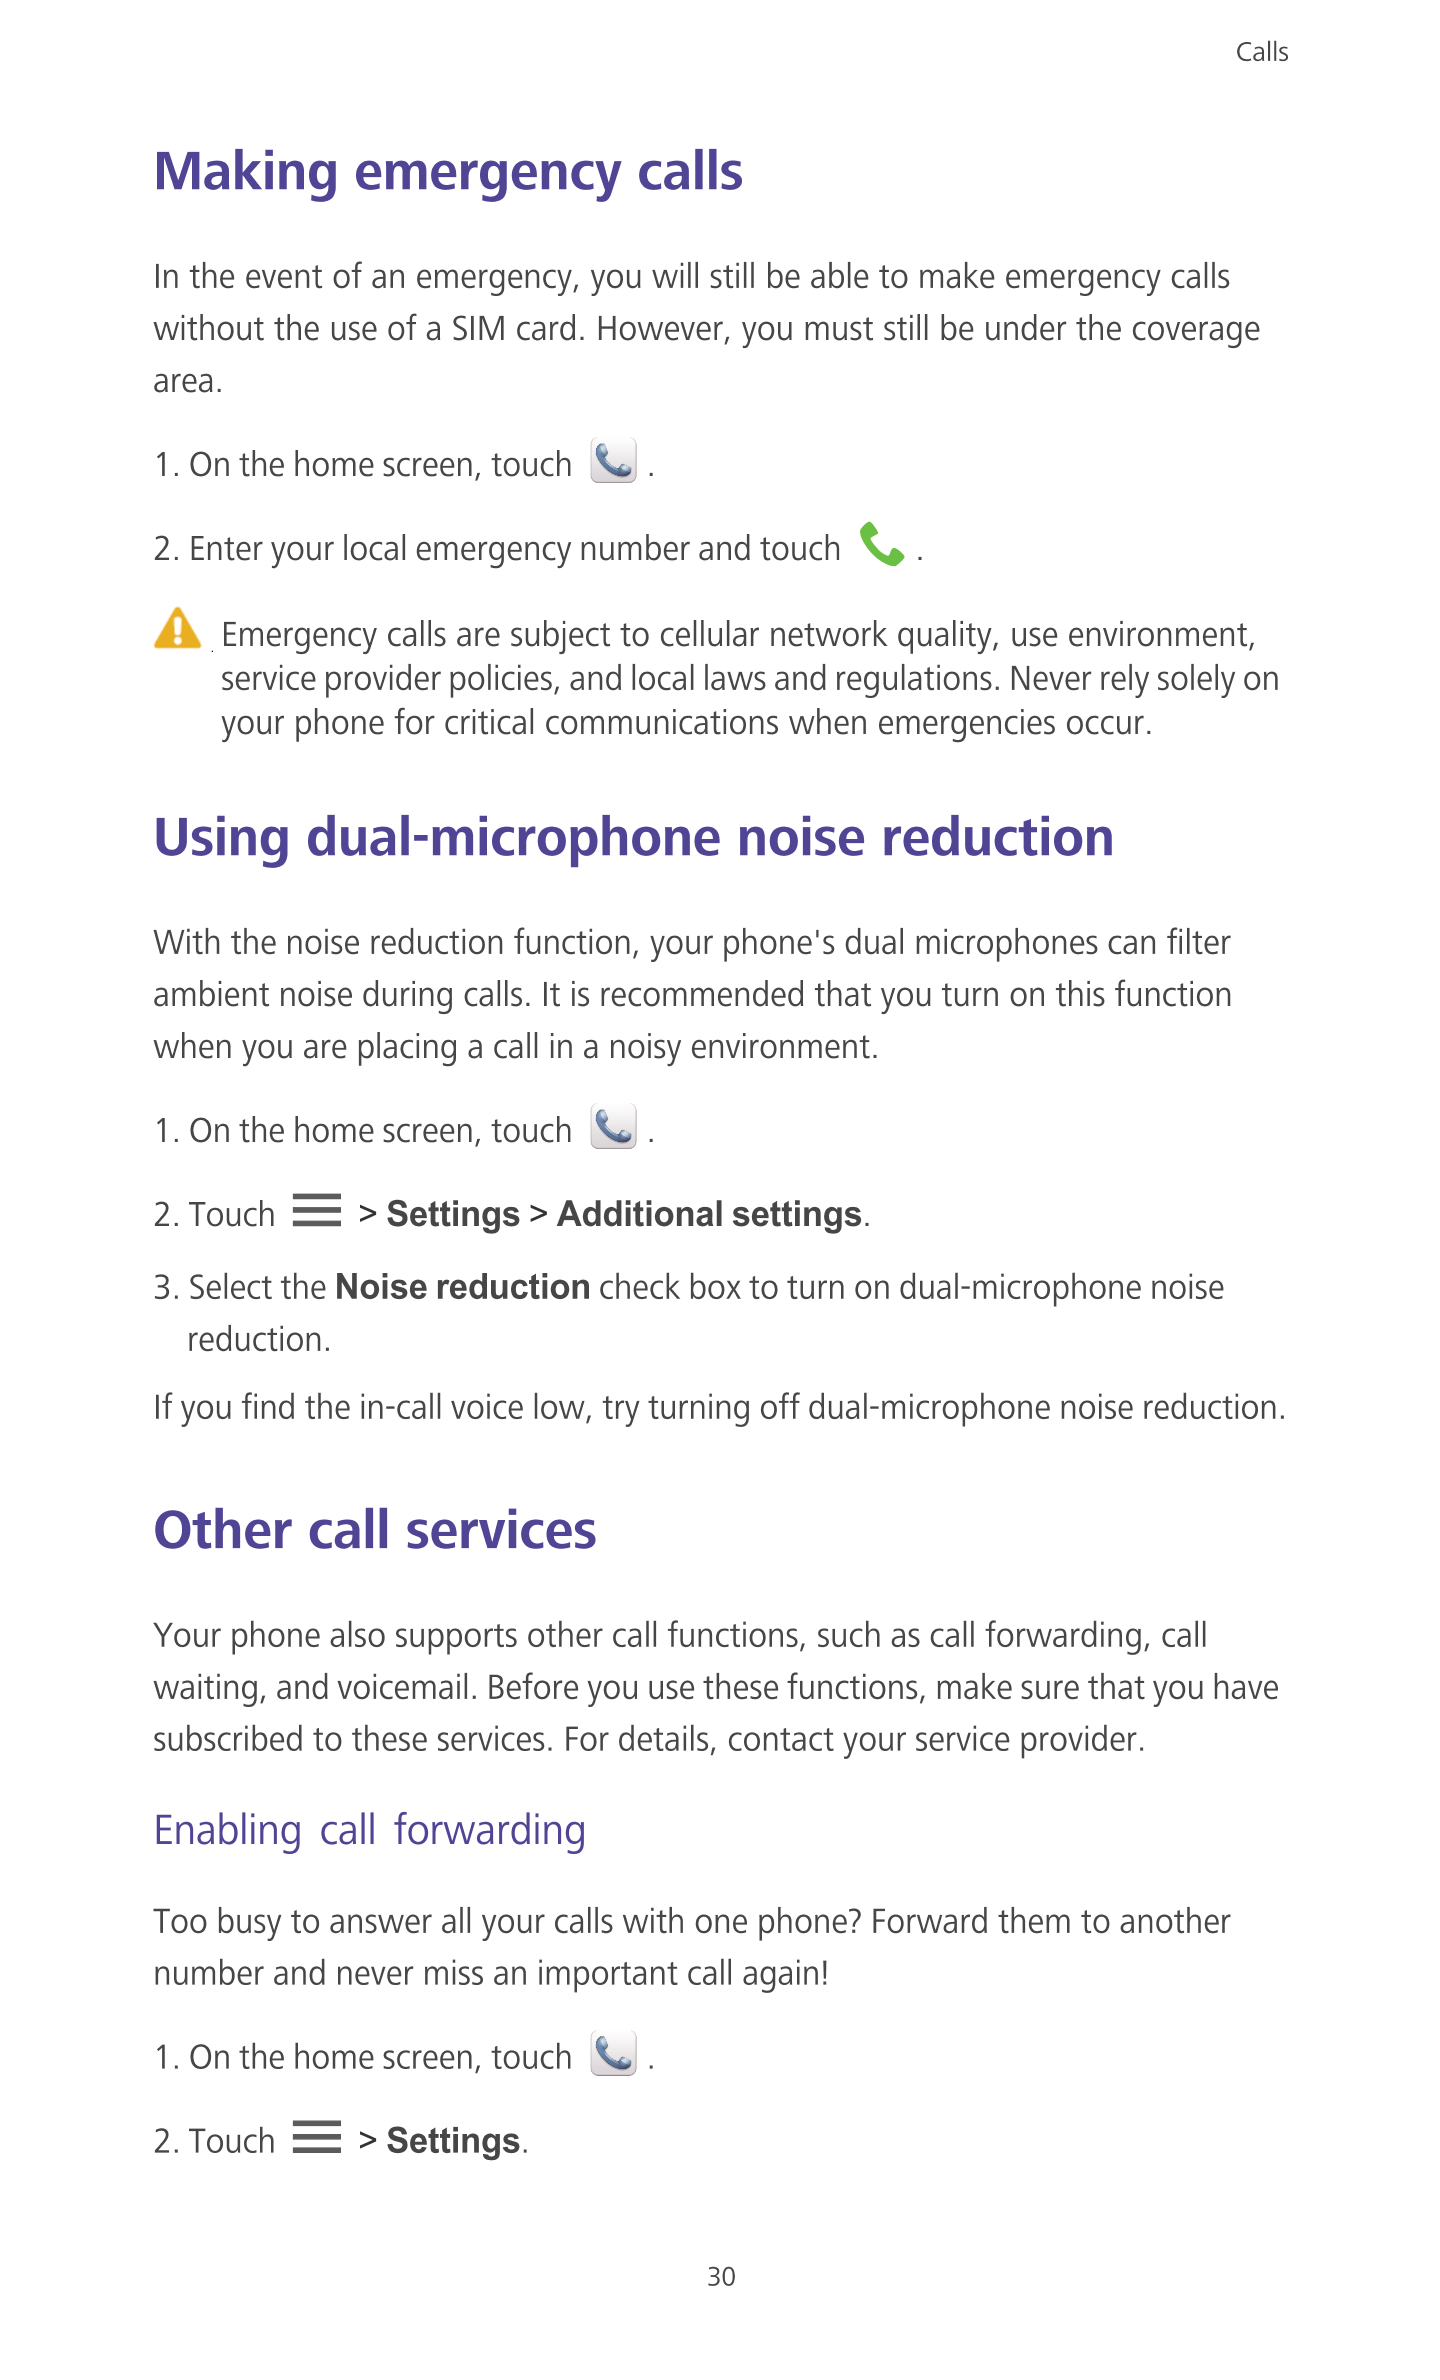 Calls
Making emergency calls
In the event of an emergency, you will  still be able to make emergency calls 
without the use of a